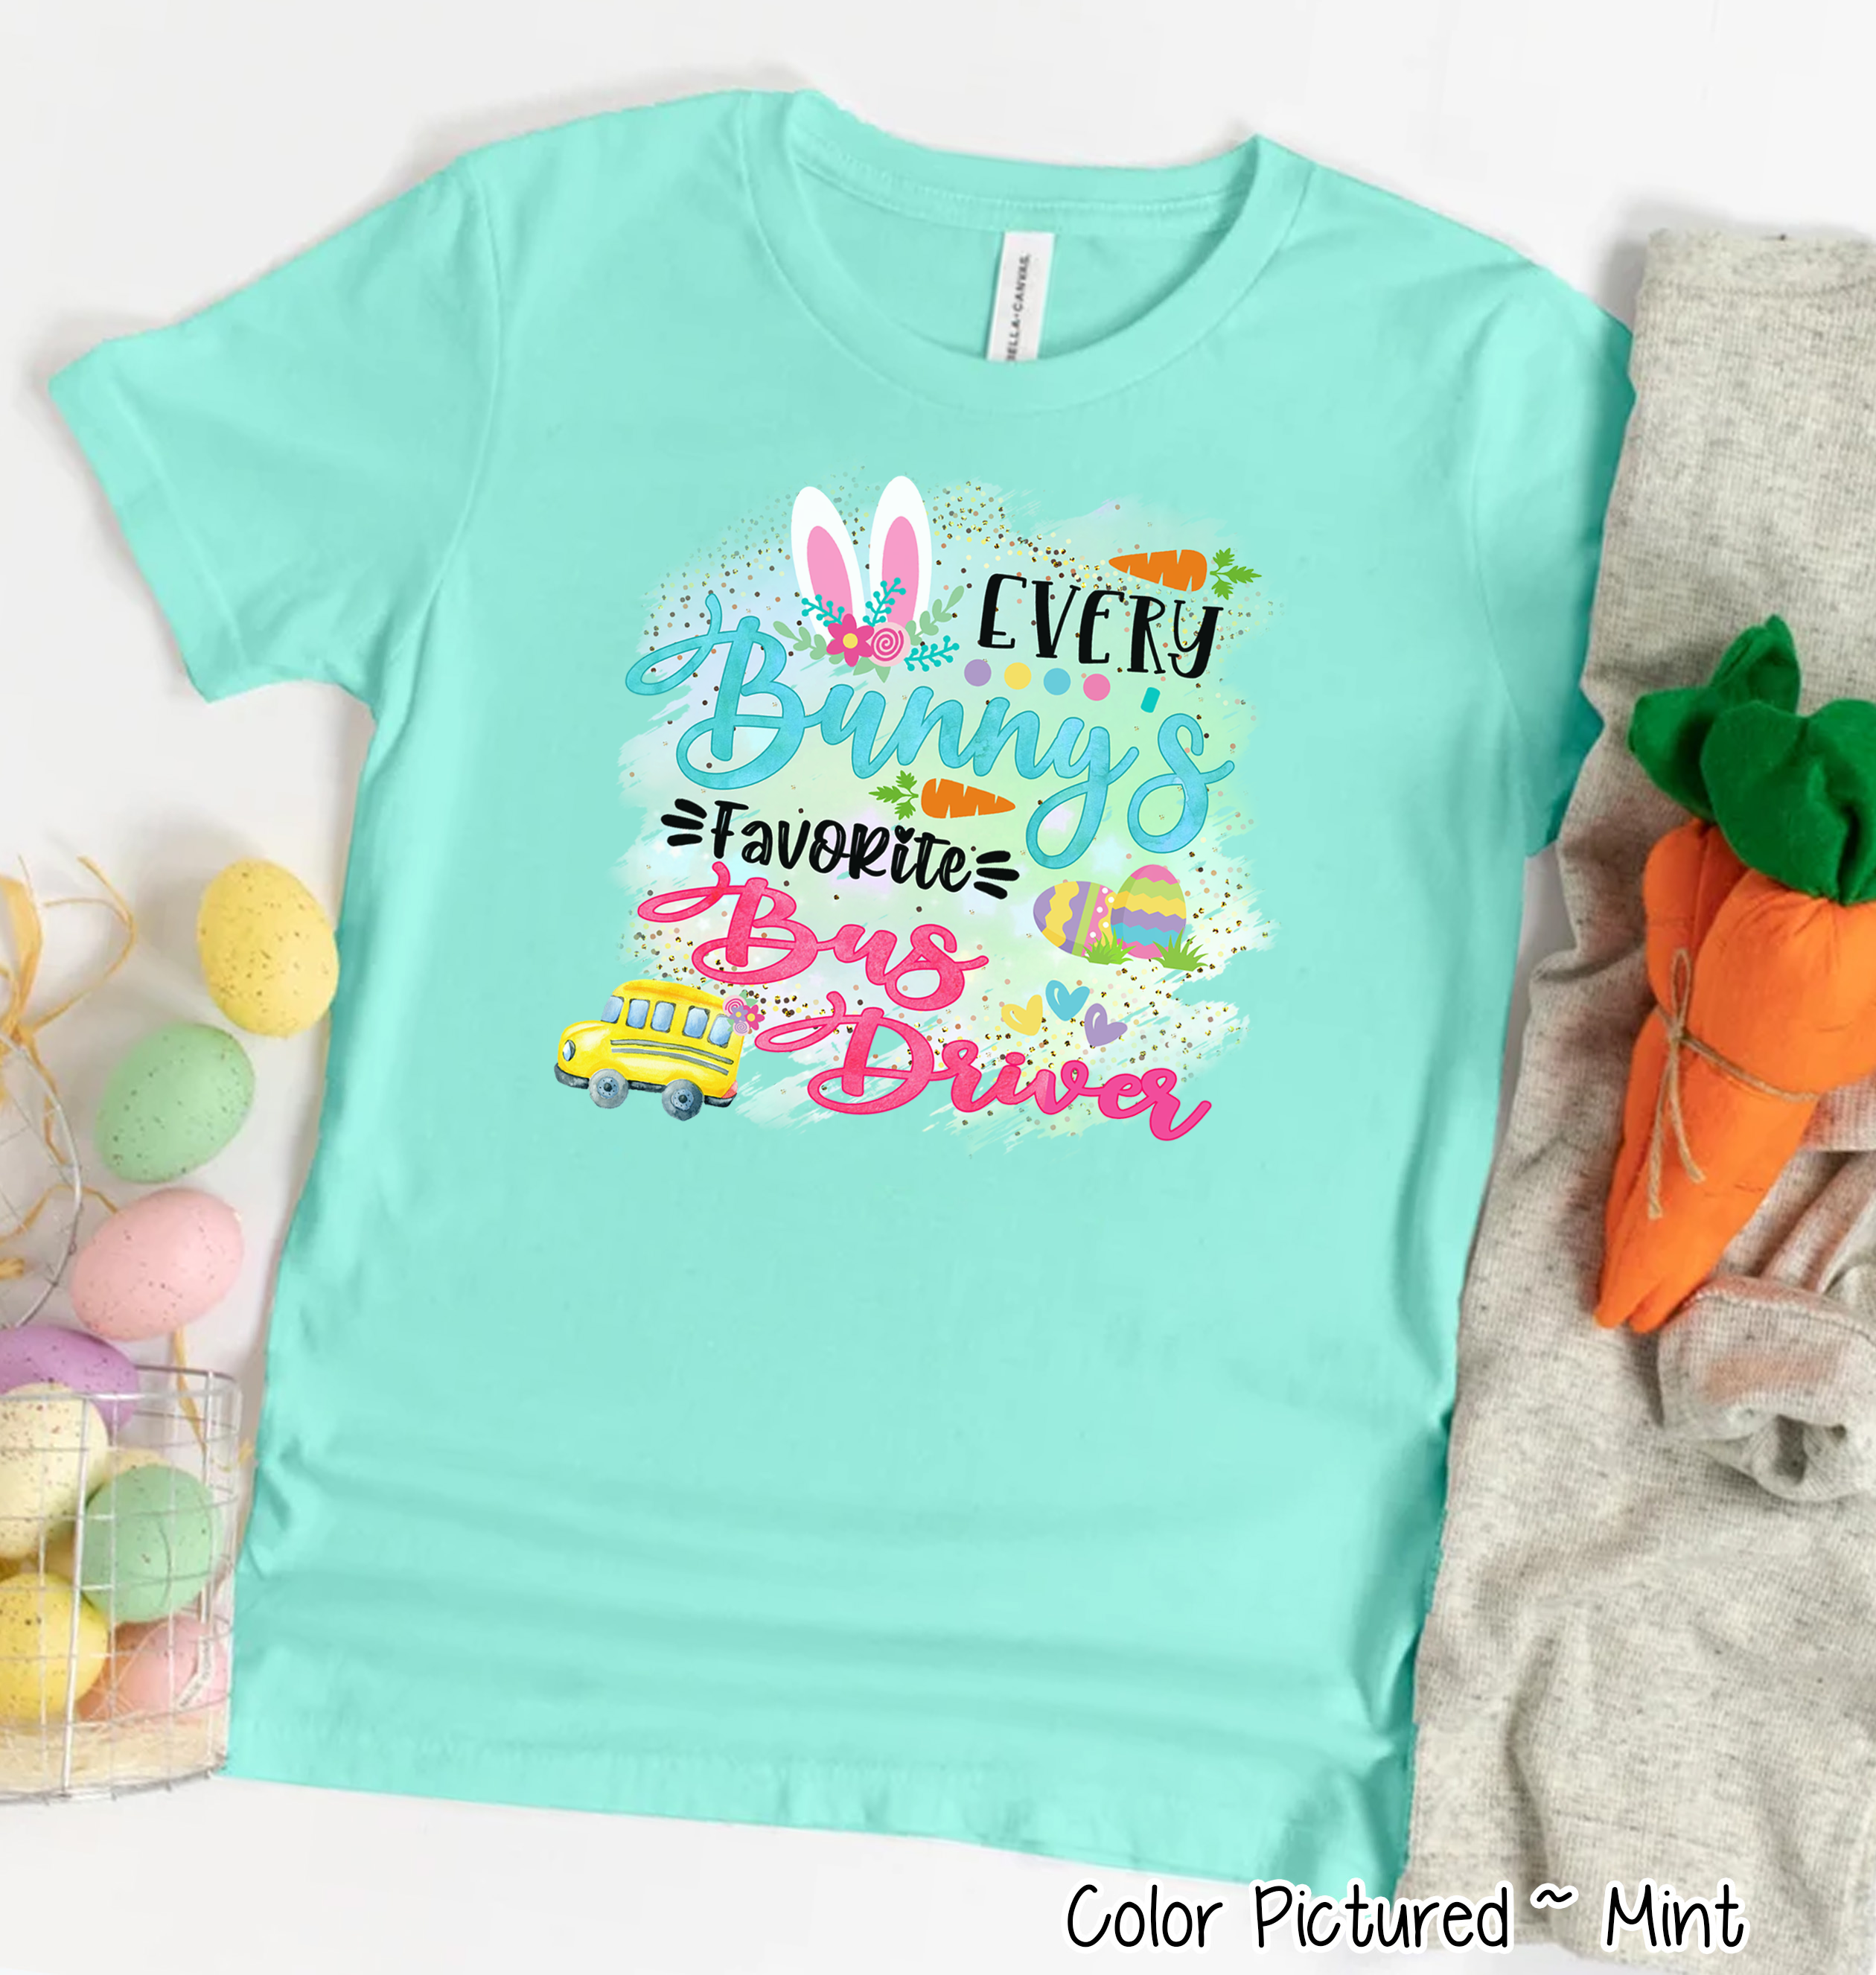 Every Bunny's Favorite Bus Driver Easter Tee